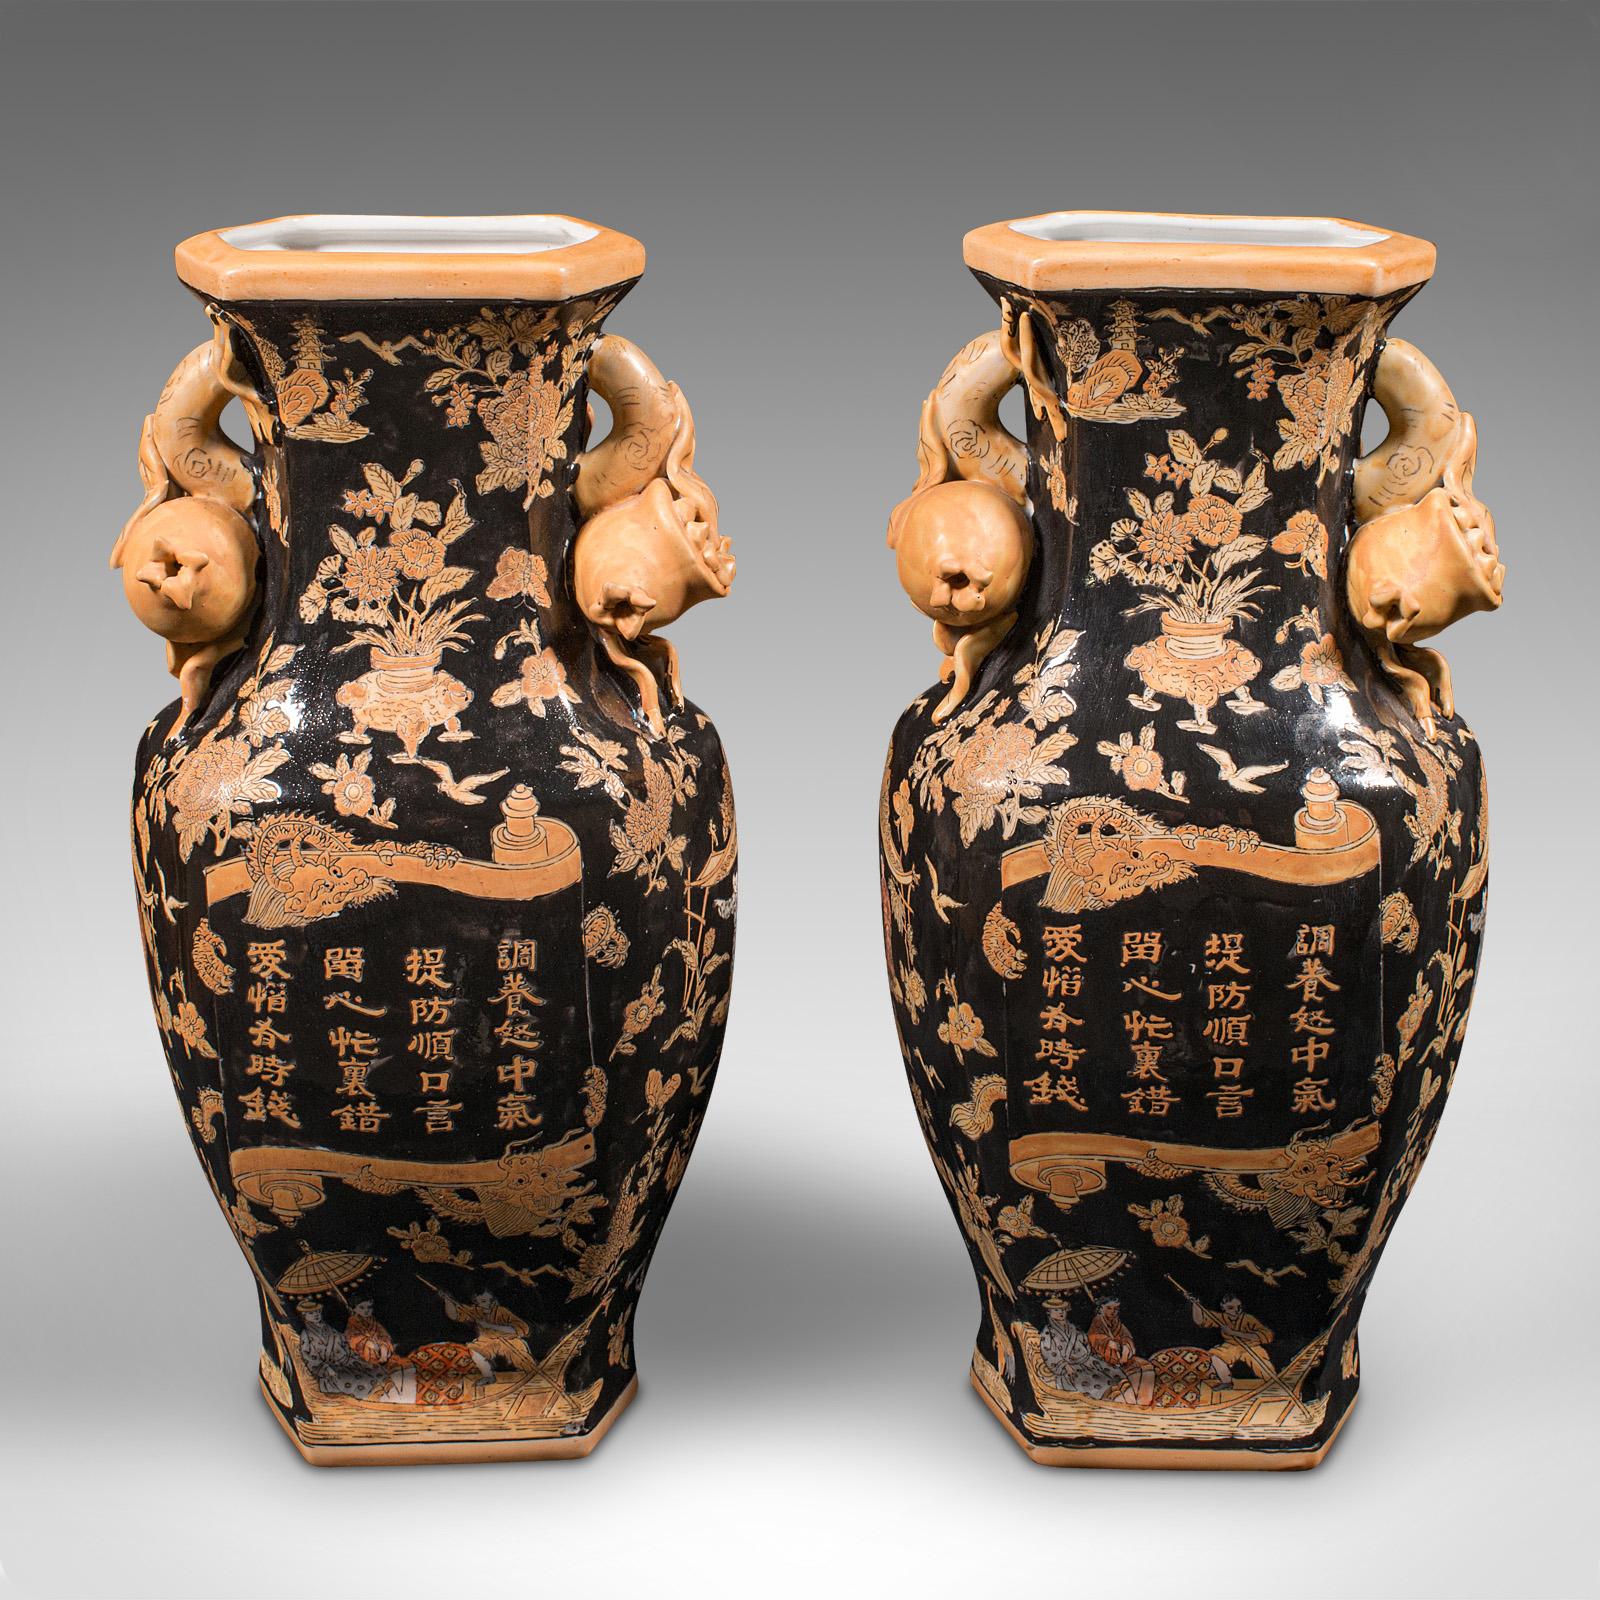 This is a pair of vintage decorative vases. A Chinese, ceramic tourist ware dried flower urn, dating to the late 20th century, circa 1980.

Strong Art Deco revival taste with distinctive black ground
Displaying a desirable aged patina and in good